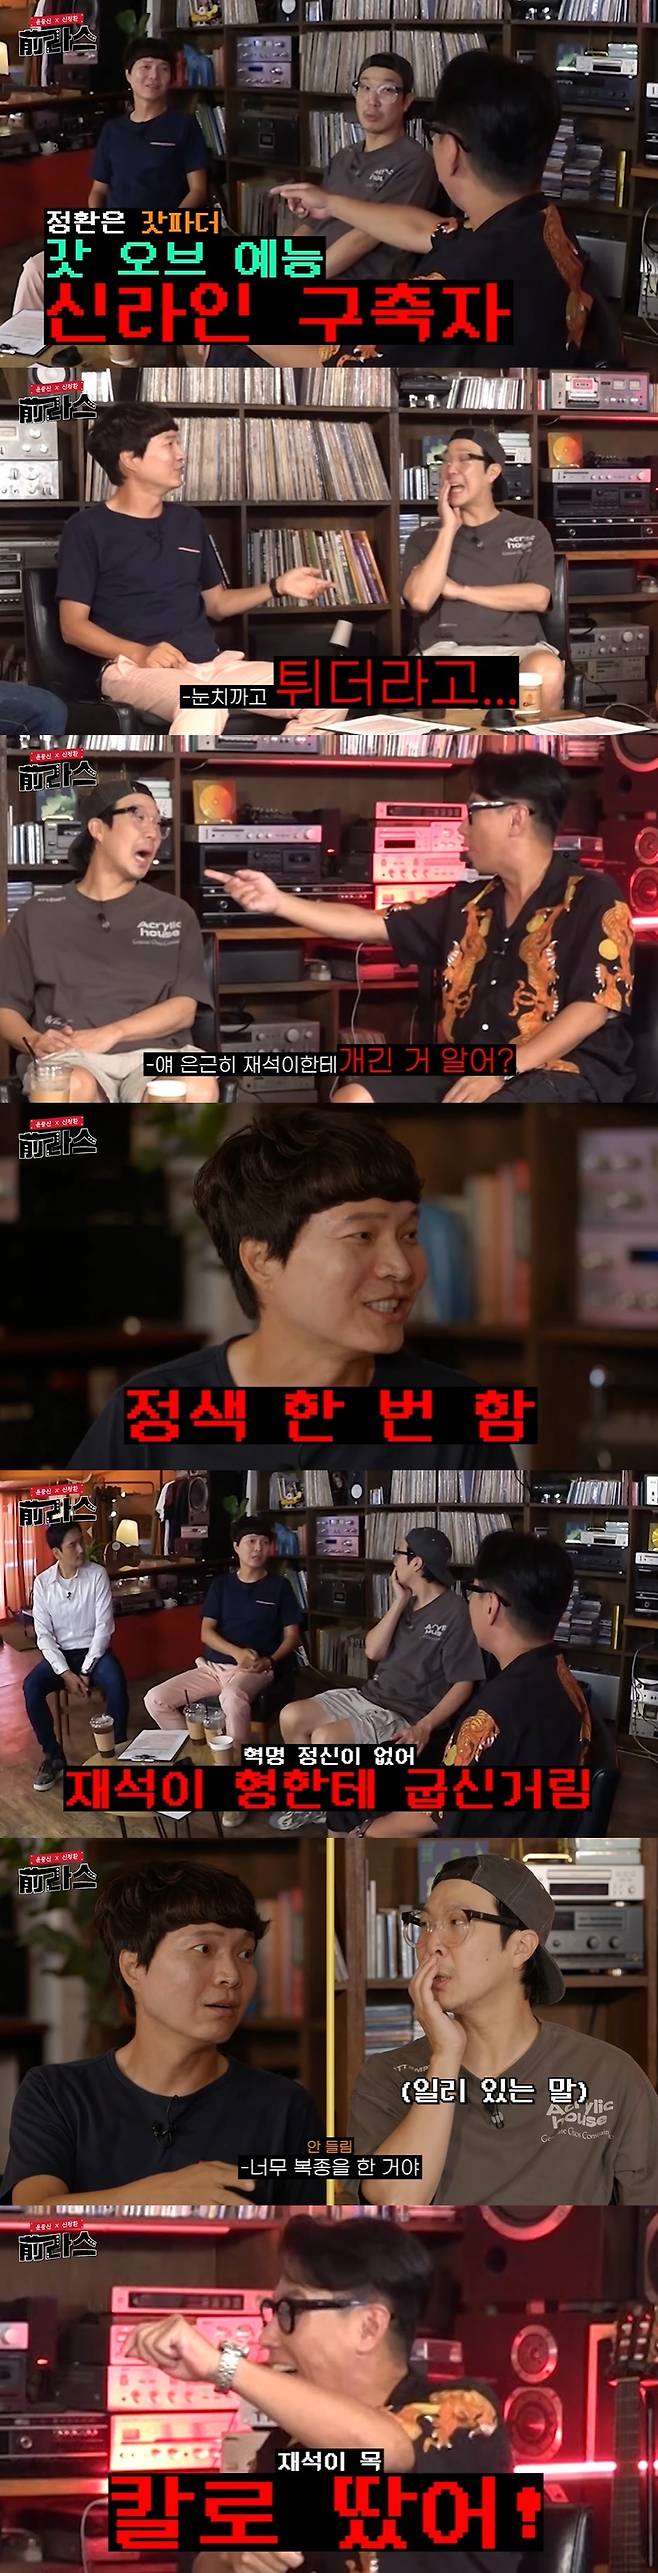 Shin Jung-hwan has spoken out about his uncomfortable relationship with Yoo Jae-Suk.Haha appeared as a guest in the video released on the YouTube channel Radio Star Dont Do That on September 3.Yoon Jong Shin introduced This member is a member of GO.Hazard GO is an entertainment program broadcast on SBS in 2007 and featured Yoo Jae-Suk, Shin Jung-hwan, Haha, and Yoon Jong Shin.Yoon Jong Shin introduced the program, saying, Park Jae-seok did not have much time, but only when Yoo Jae-Suk was not available.Yoon Jong Shin asked about the relationship between Haha and Shin Jung-hwan except for Haja GO, and Haha said, My brother was a god of art and tried to build my line.Shin Jung-hwan said, Haha was a little bit of a bargaining stage, but he noticed and splashed out after he picked up Chun Myung-hoon, Kim Jung-min and Lee Jung as his lines.I felt that he couldnt go long, he said.Yoon Jong Shin revealed that when Jung Hwan came up, he secretly opened it to Park Jae-seok.Shin Jung-hwan said, Everyone else is trying to look good to Park Jae-seok, but I did not have it.Park Jae-seok said, My brother did not control me. He said, I did not play well with me later, so I was excluded.Thats why the GO went down, Shin Jung-hwan said, so everyone was grovelling at Park Jae-seok.I was too obedient.